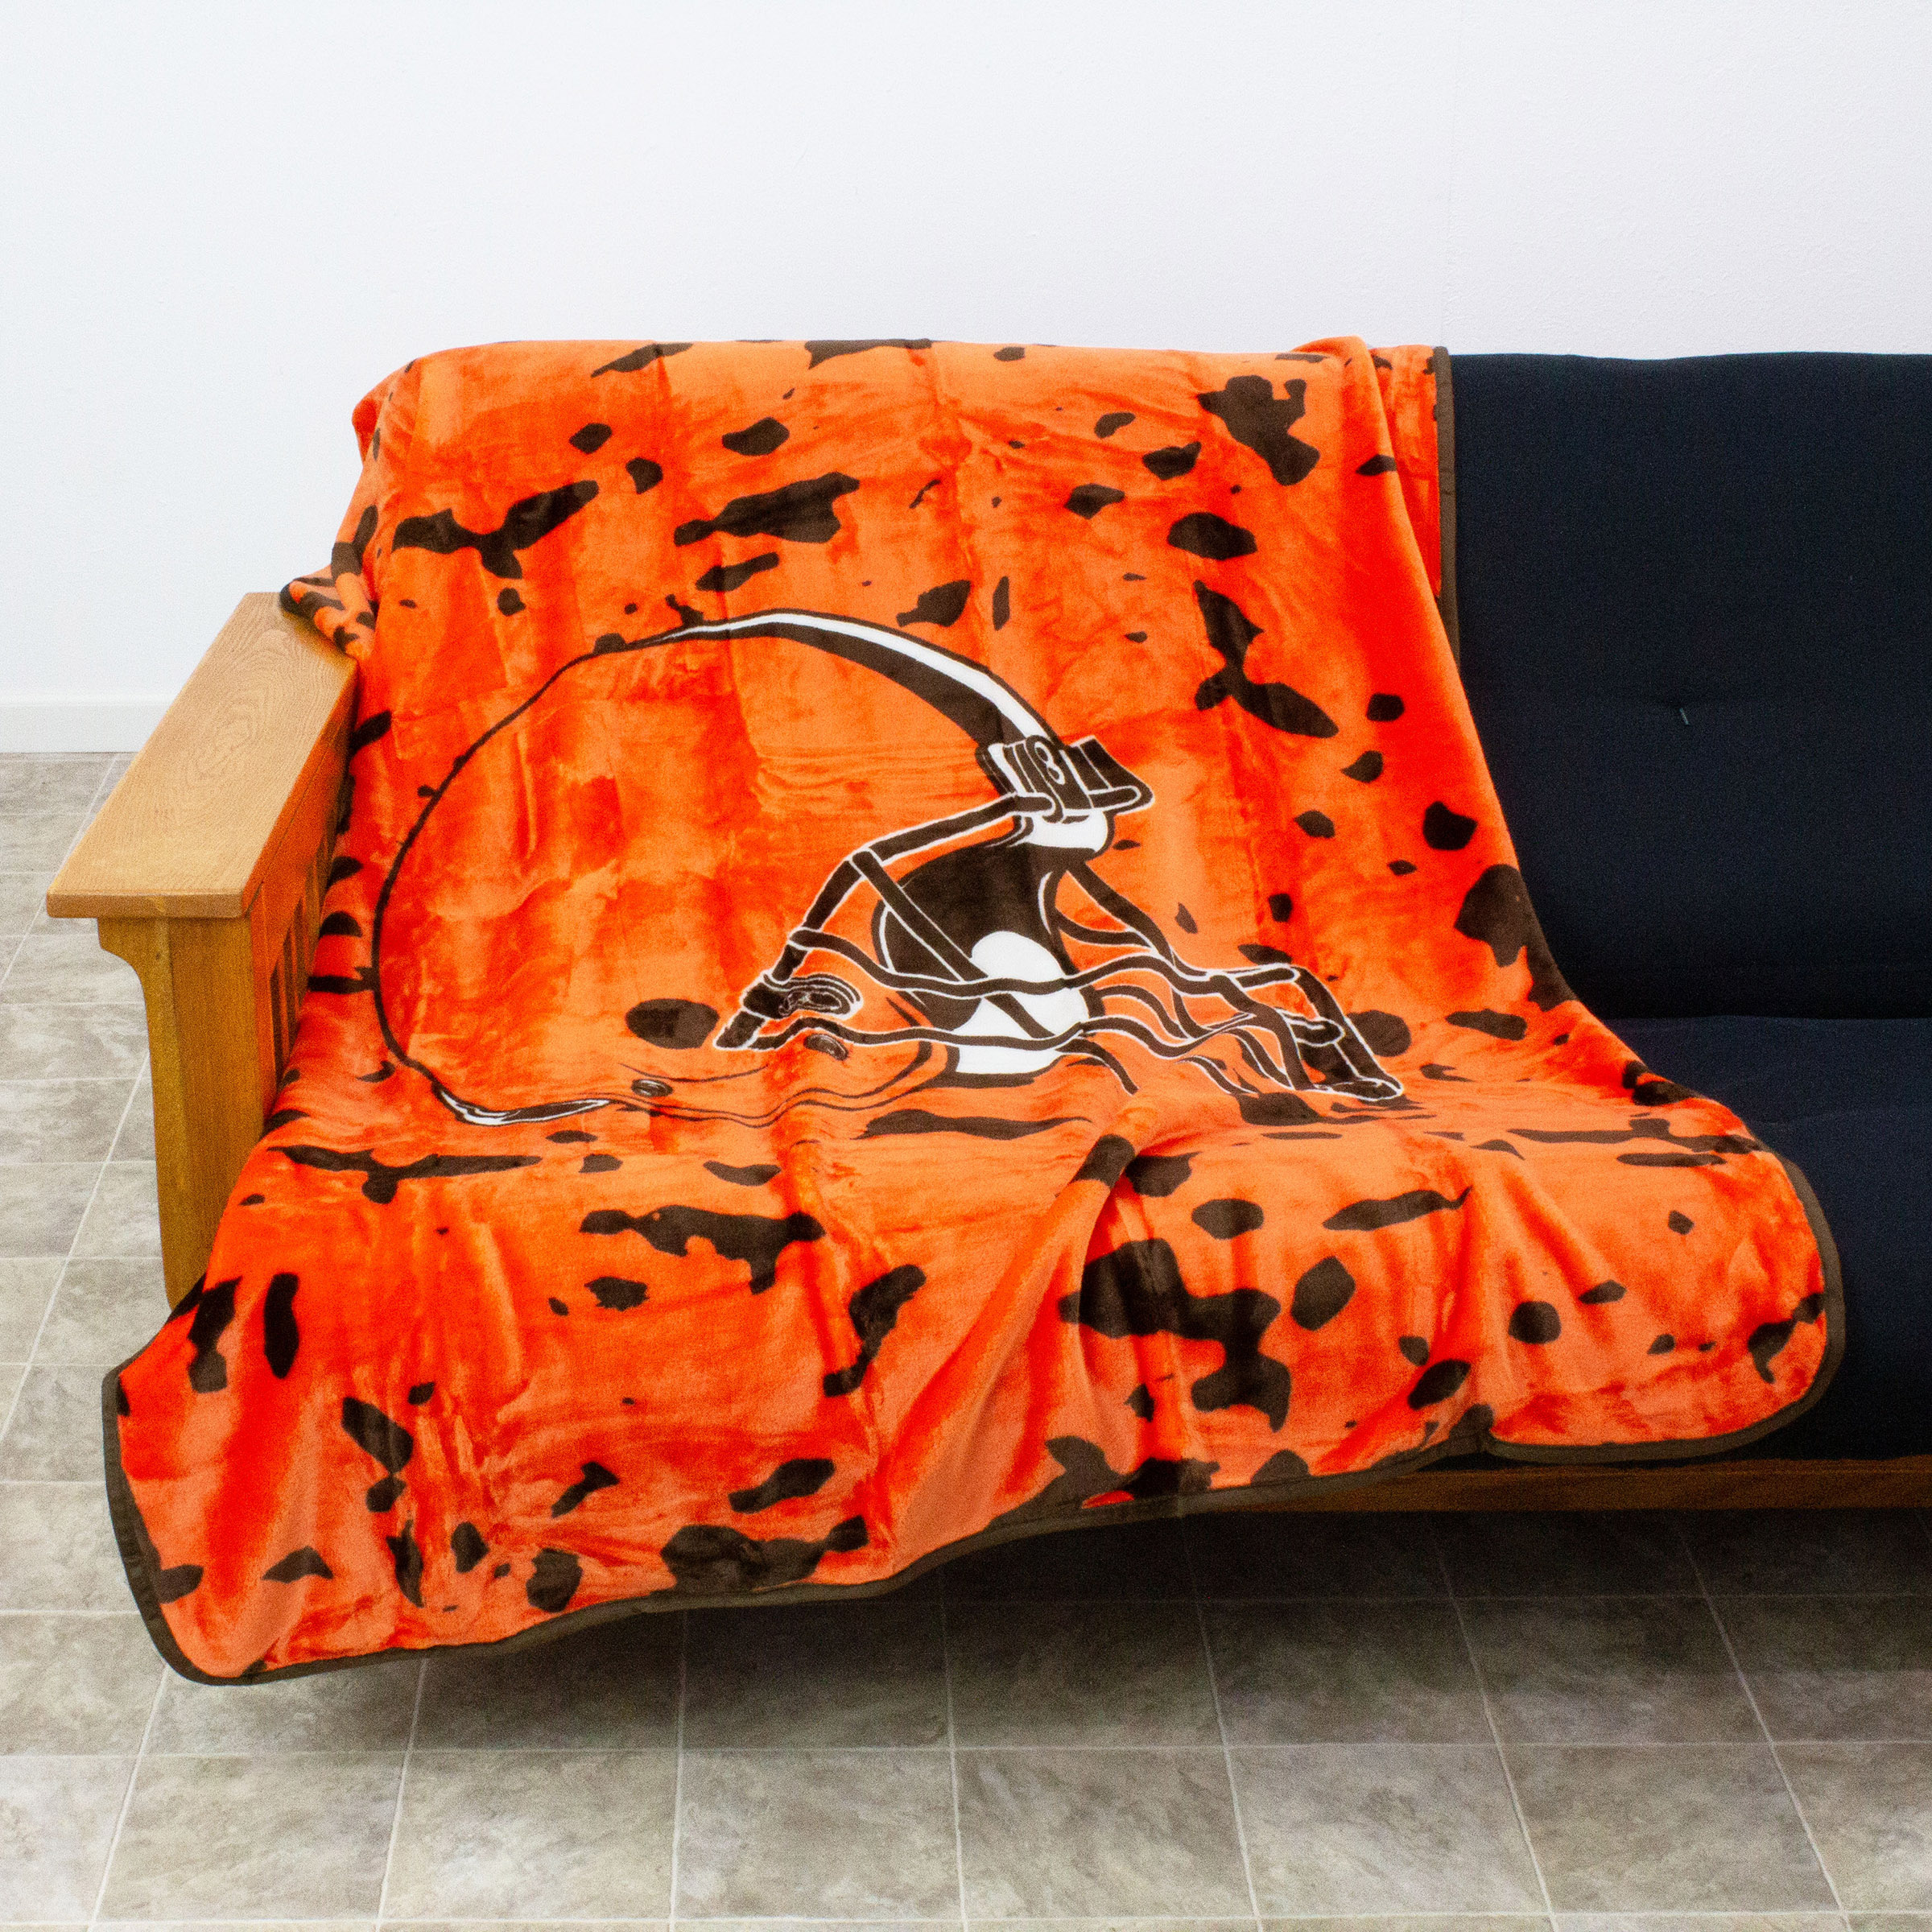 Cleveland Browns 50 x 60 Teen Adult Unisex Comfy Throw Blanket - image 4 of 5